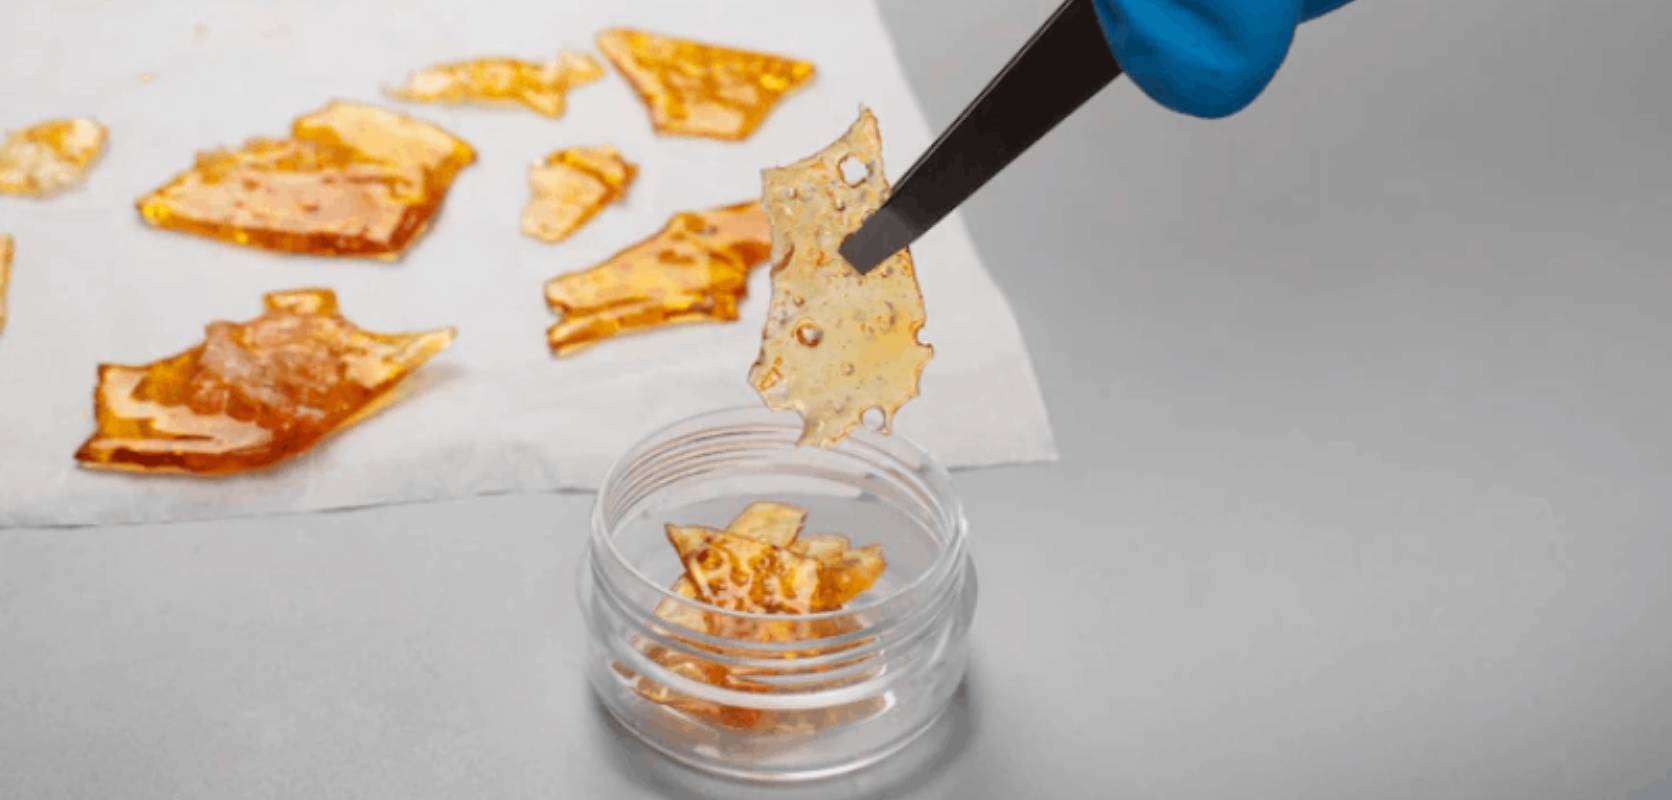 Shatter cannabis concentrate and cannabis wax from west coast cannabis online weed dispensary for mail order marijuana and to buy weed online.